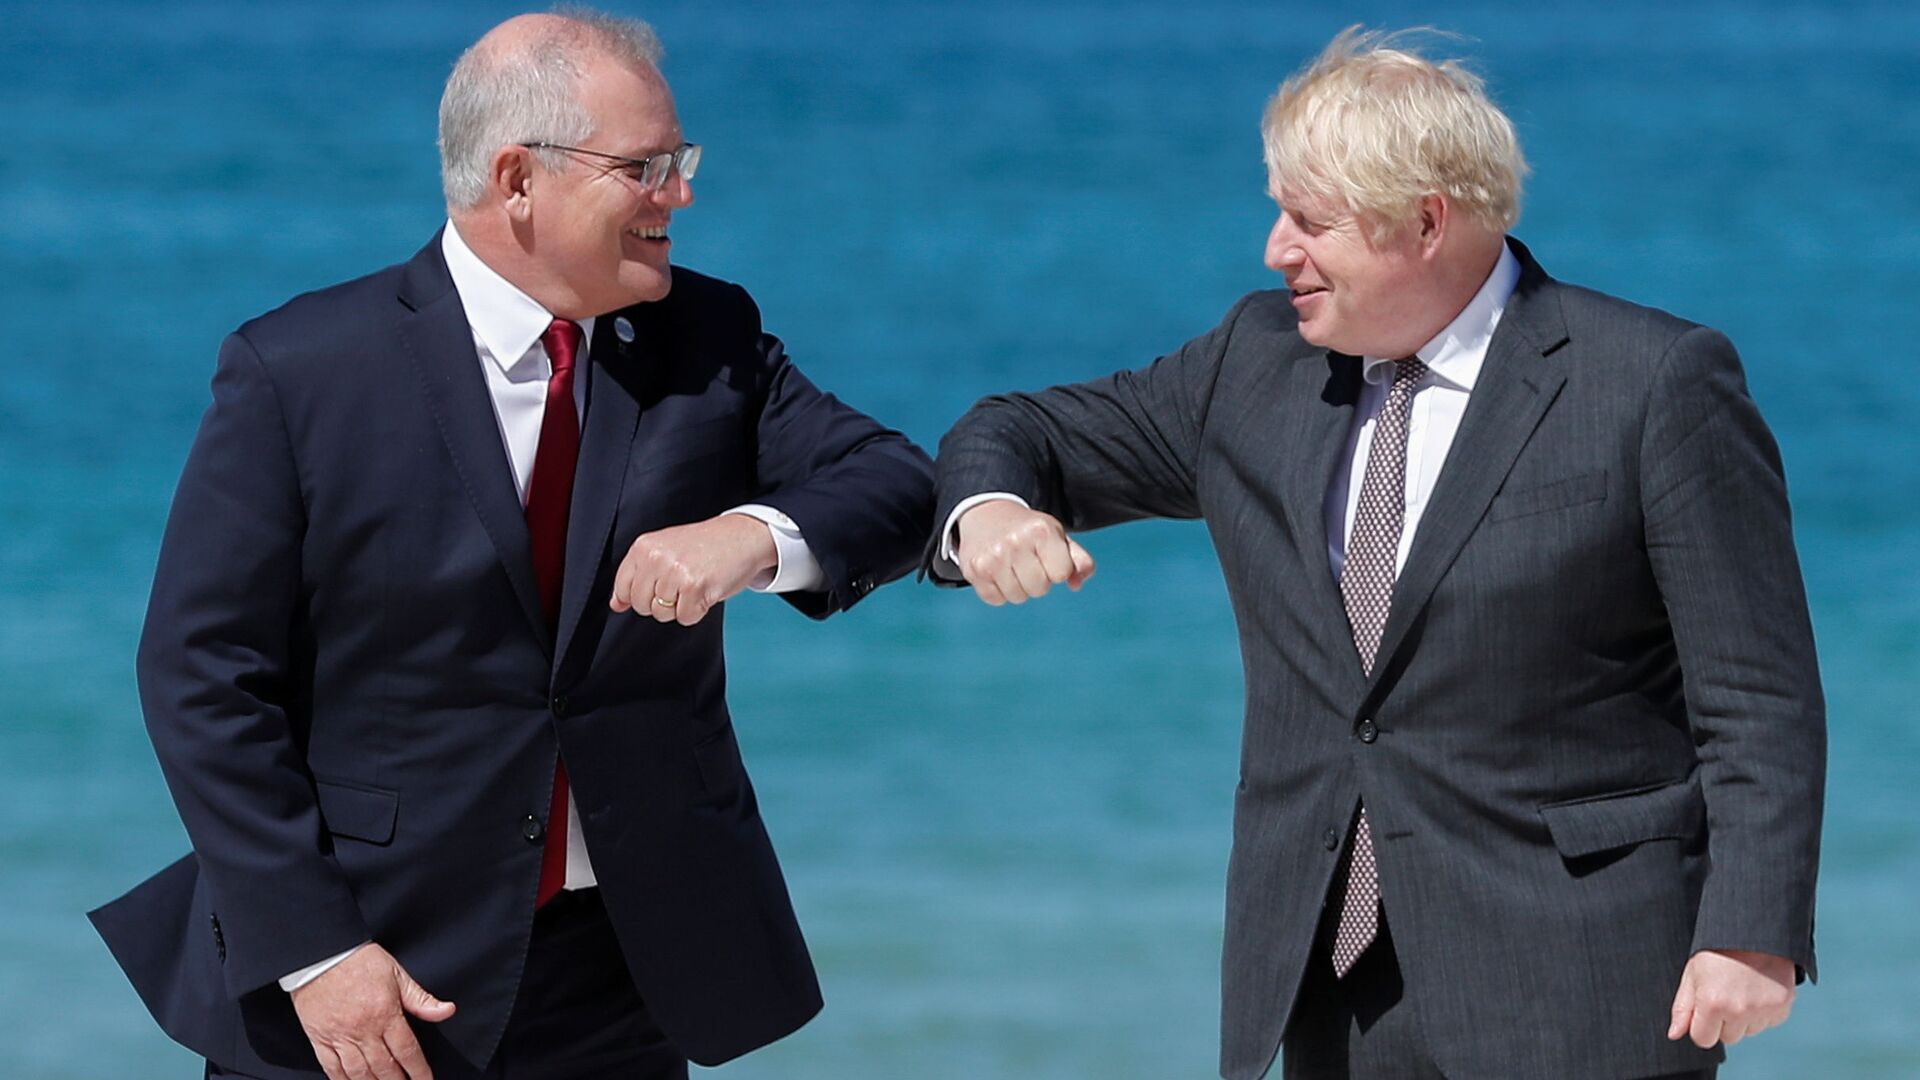 Britain's Prime Minister Boris Johnson greets Australia's Prime Minister Scott Morrison during an official welcome at the G7 summit in Carbis Bay, Cornwall, Britain, 12 June 2021.  - Sputnik International, 1920, 15.06.2021